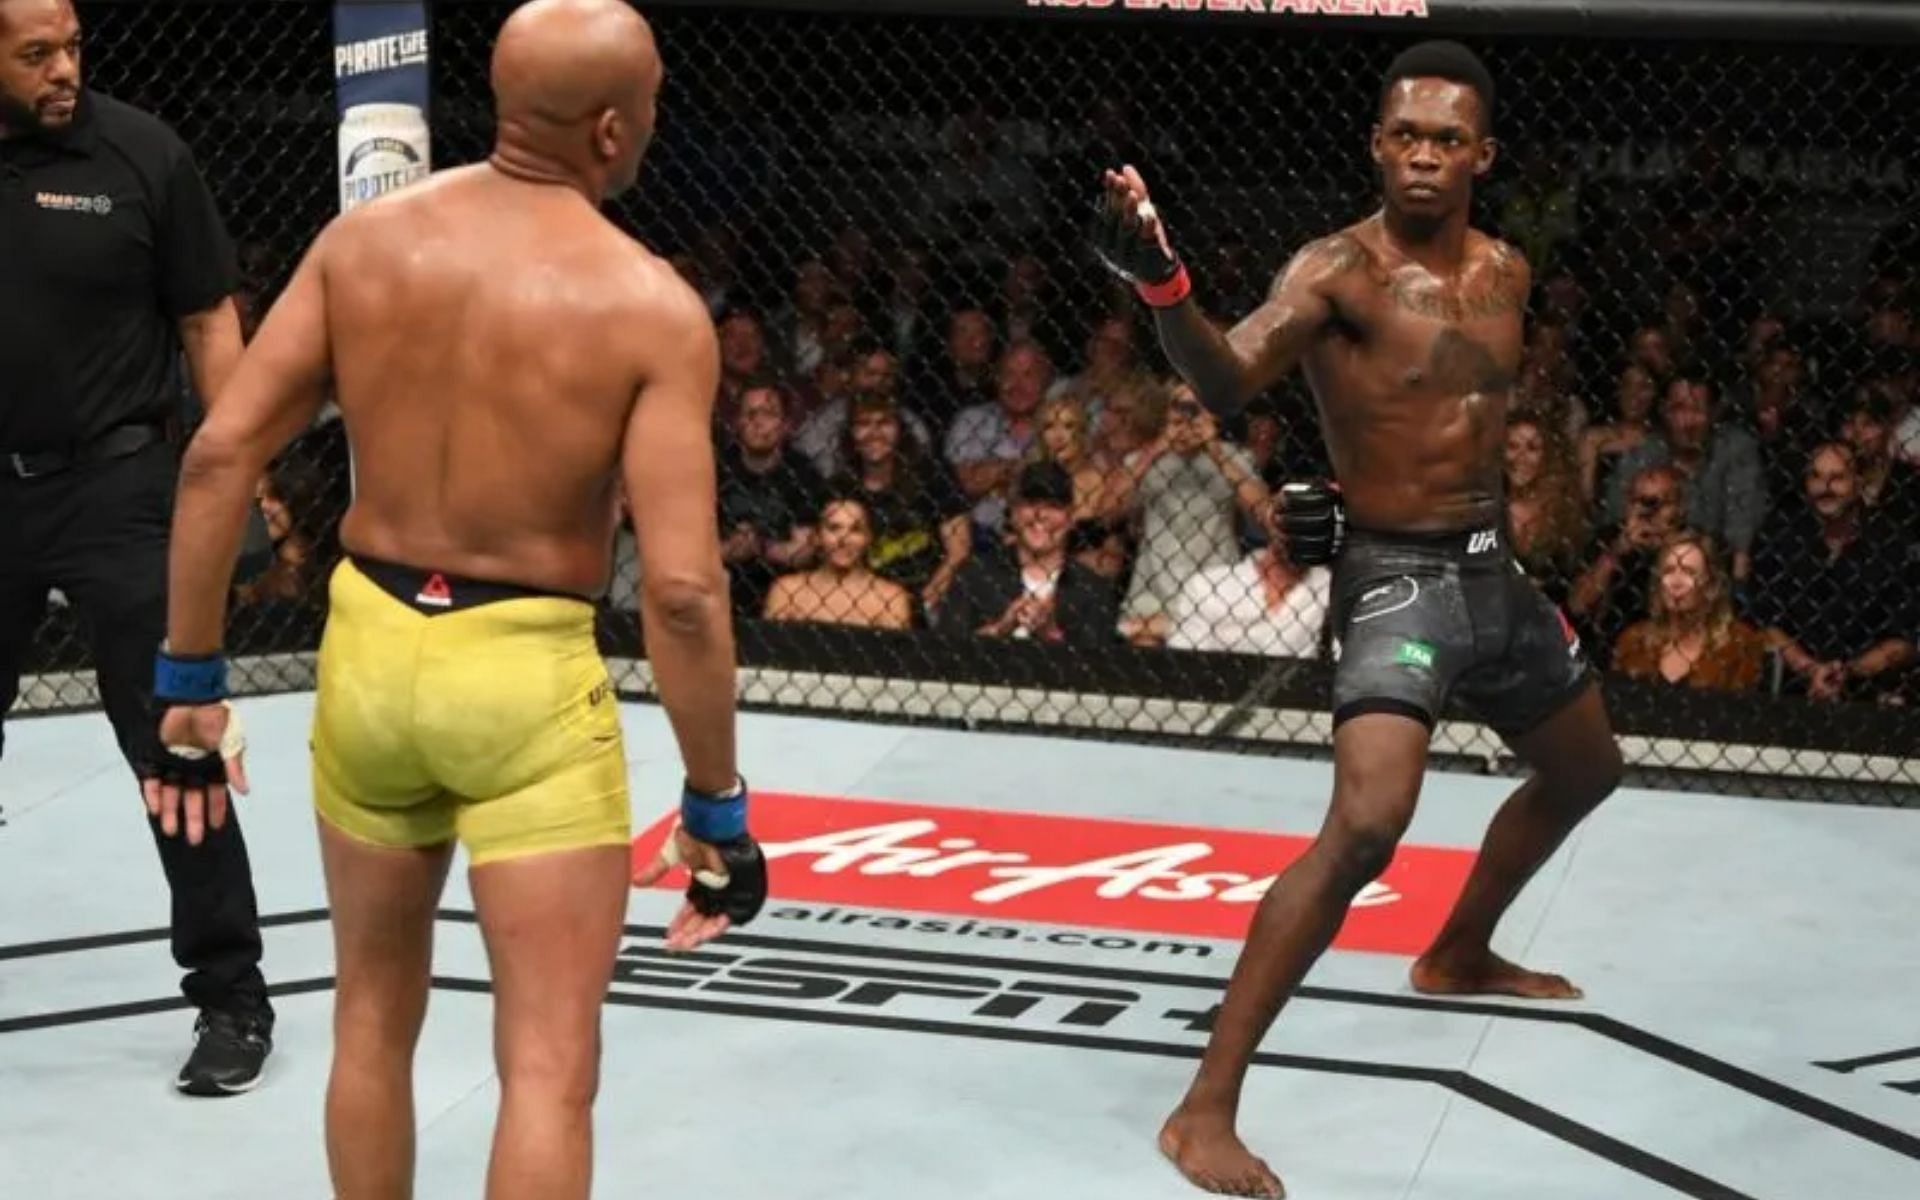 Can Israel Adesanya surpass Anderson Silva as the GOAT of the middleweight division?